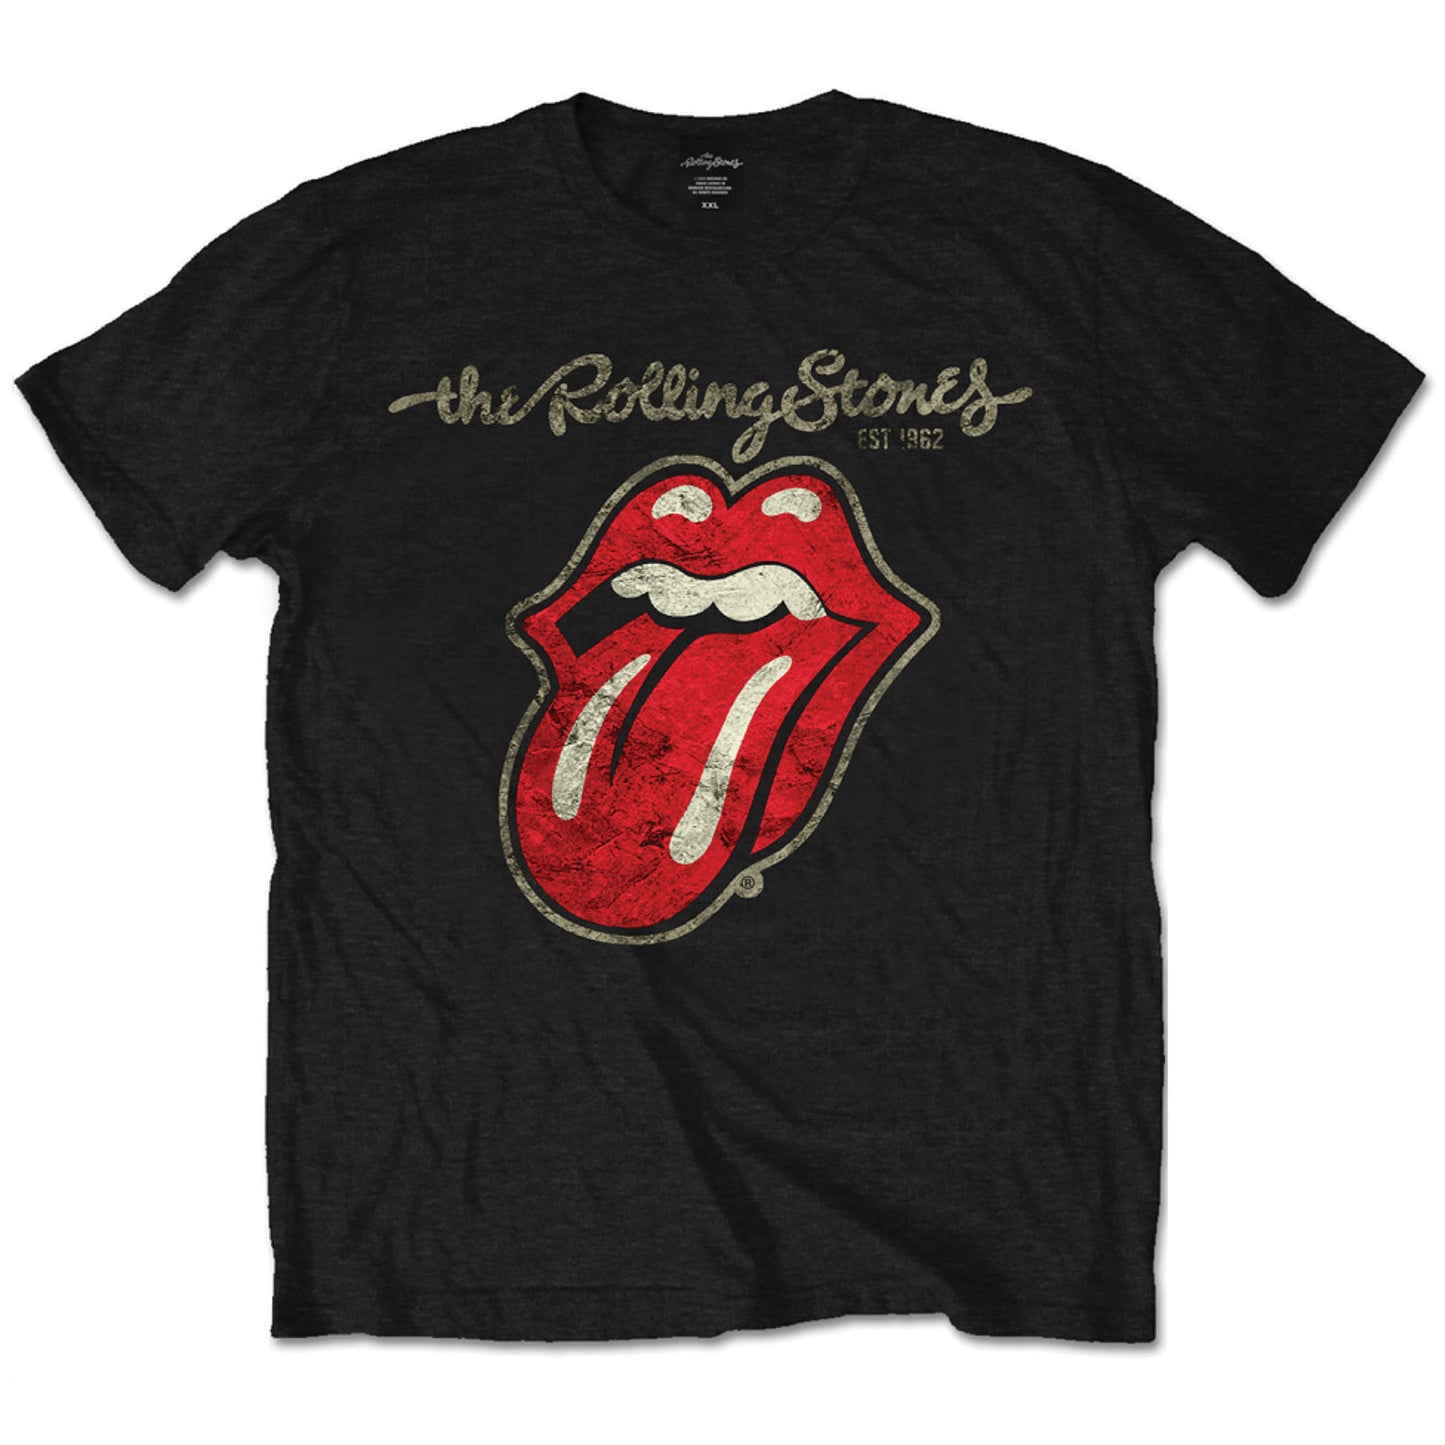 The Rolling Stones T-Shirt: Plastered Tongue